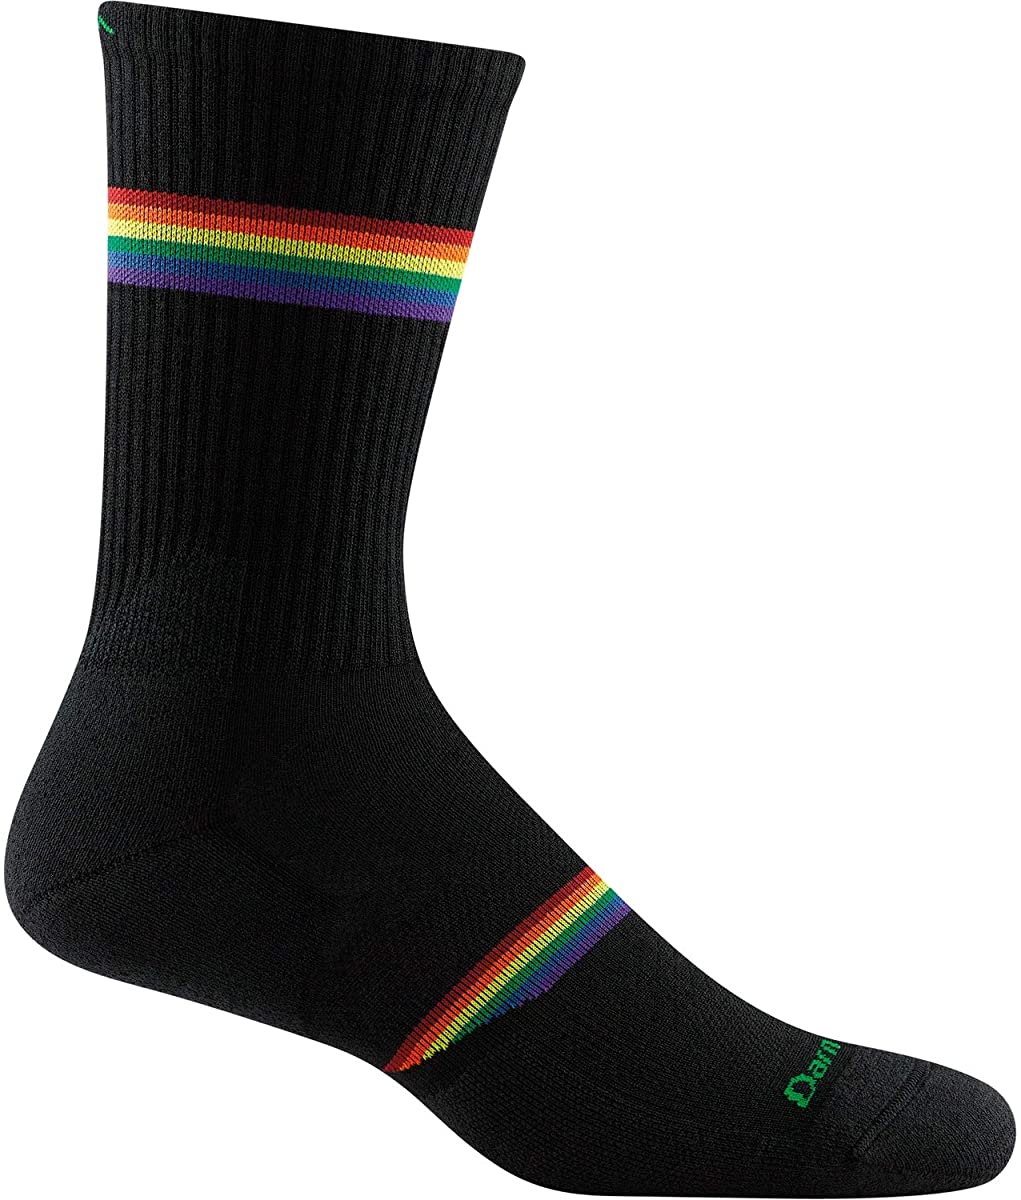 Men's Darn Tough Prism Crew Light Cushion Sock in Black from the side view